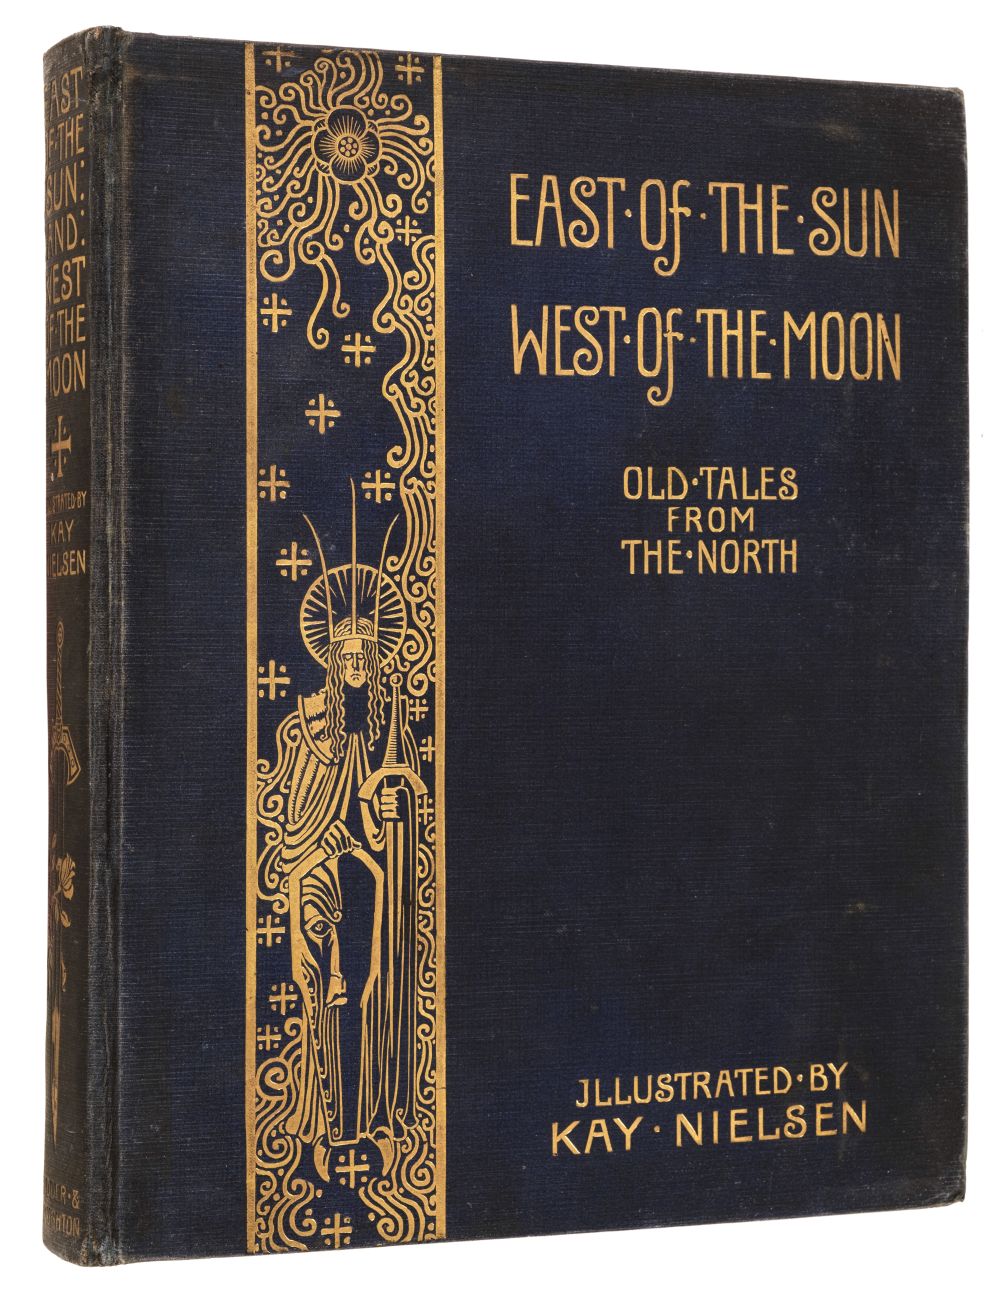 Nielsen (Kay, illustrator). East of the Sun and West of the Moon, [1914]